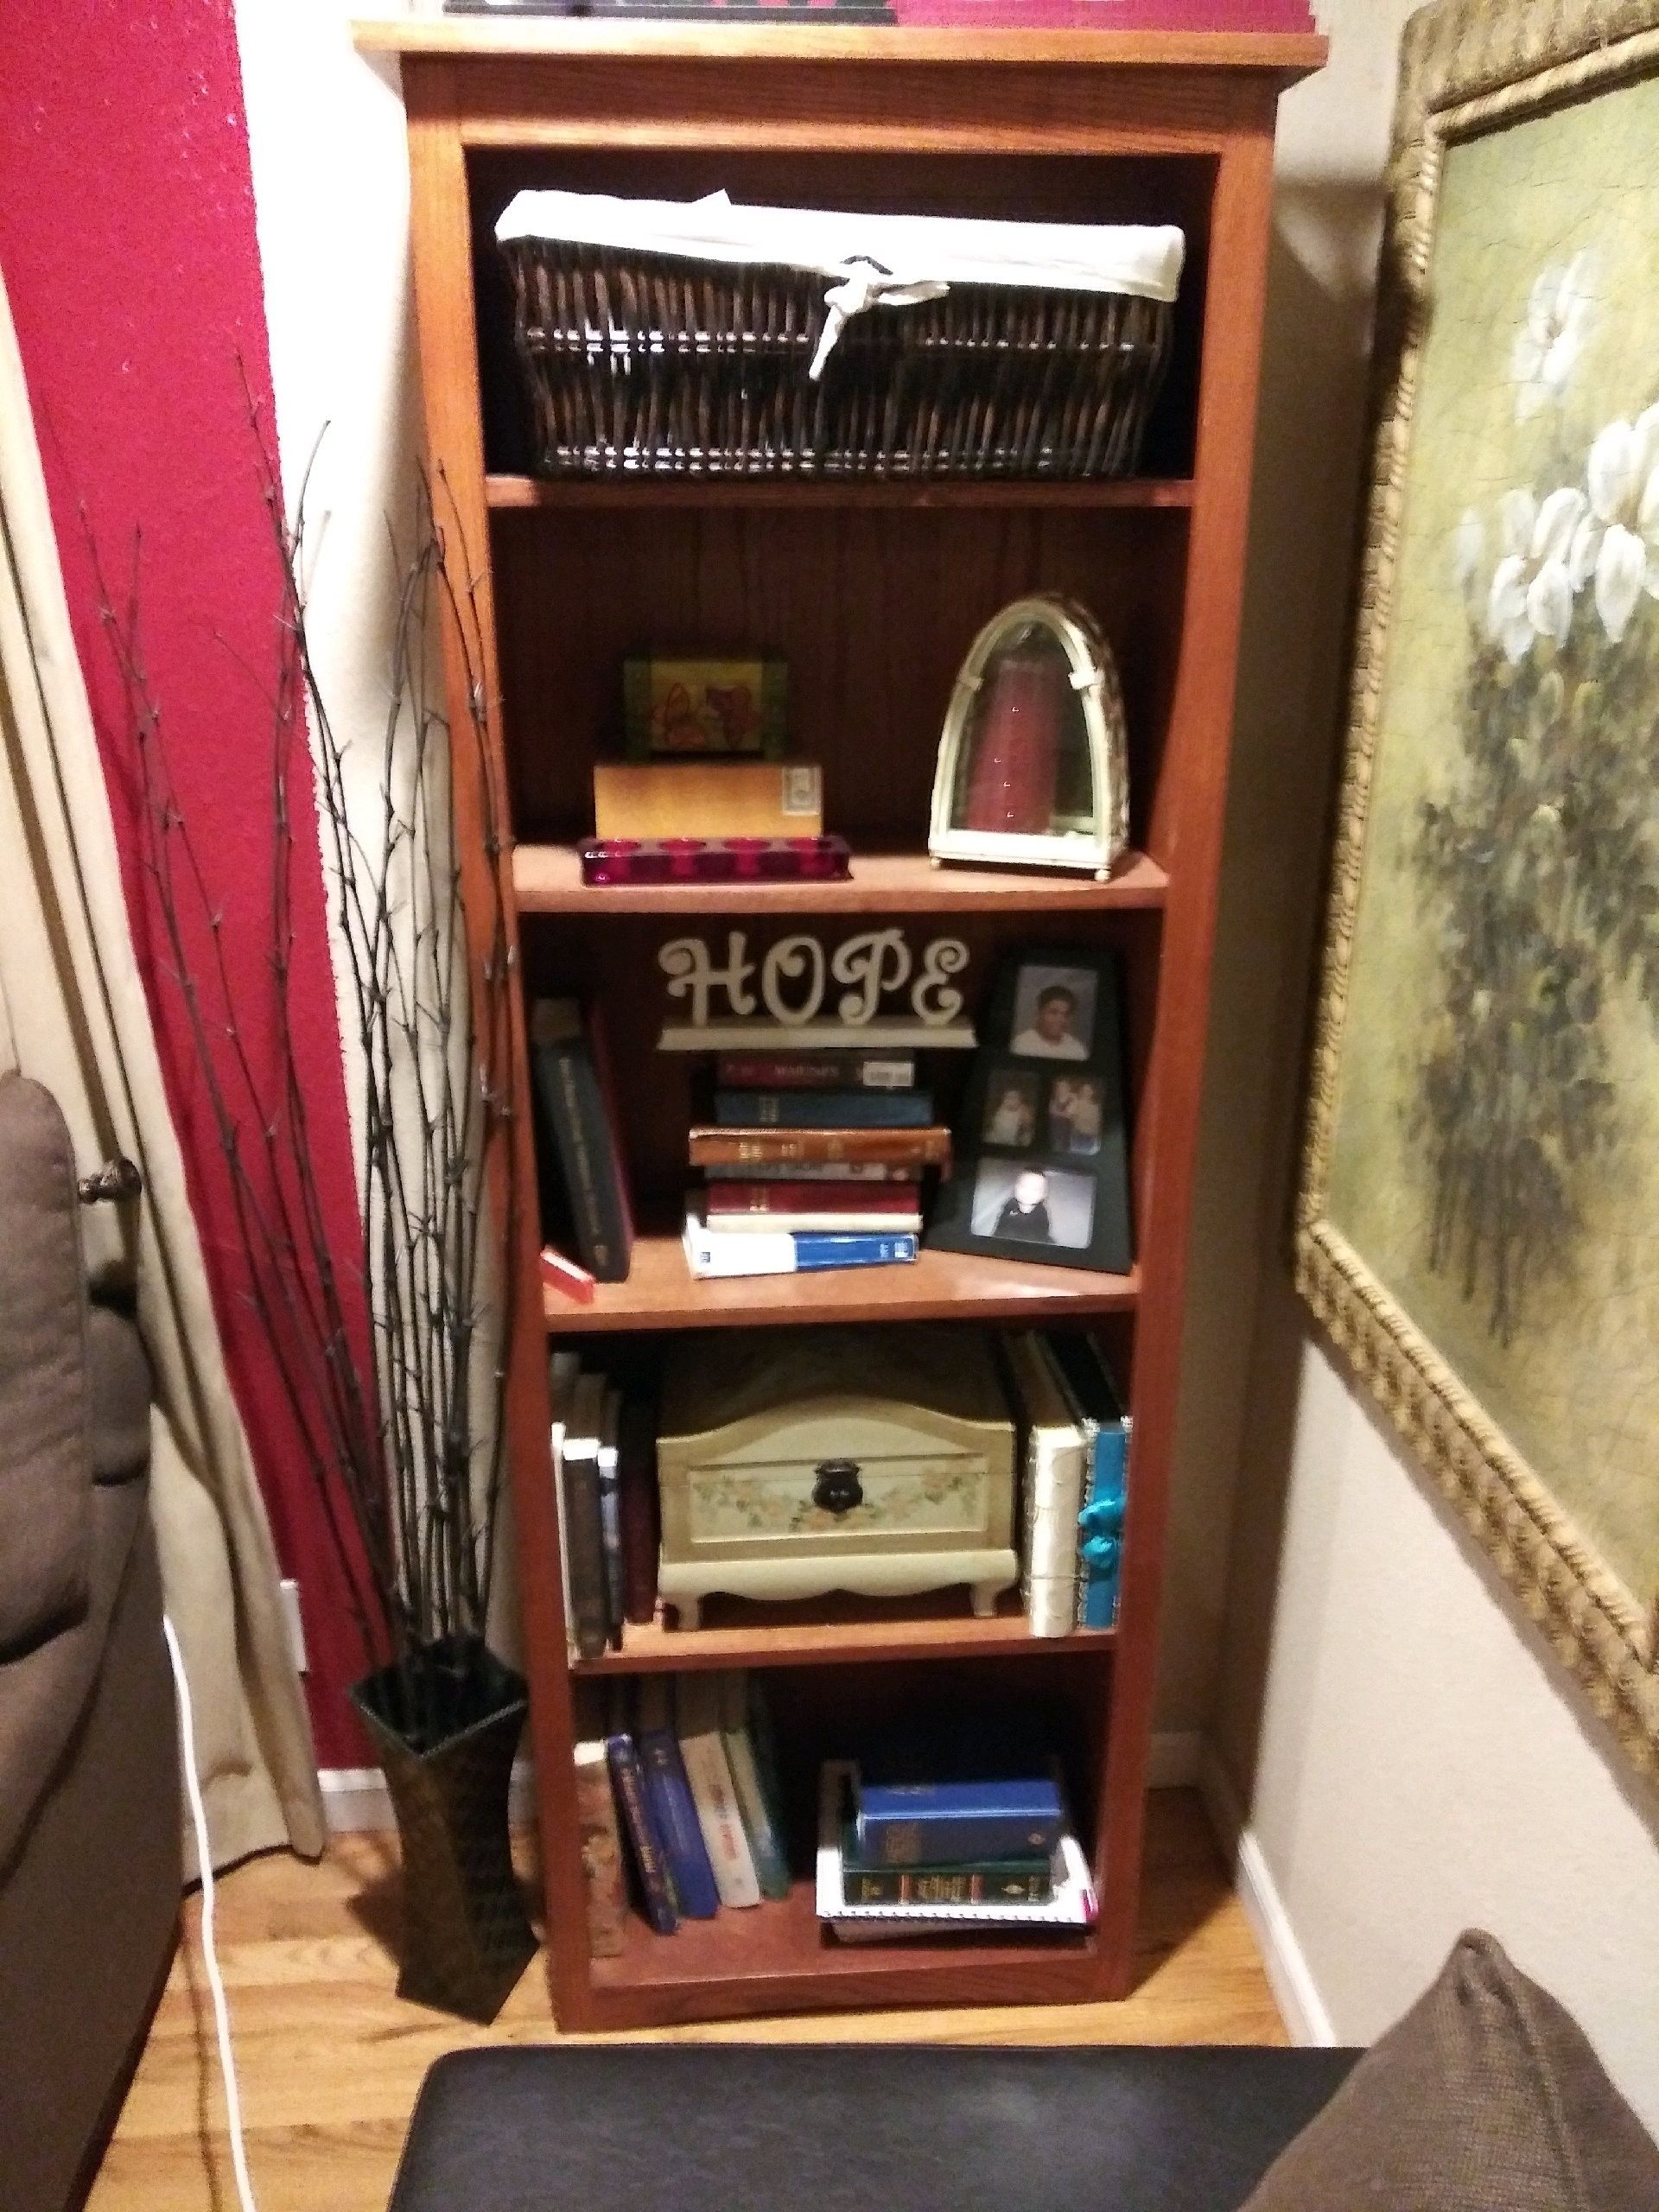 Two mission style bookshelves